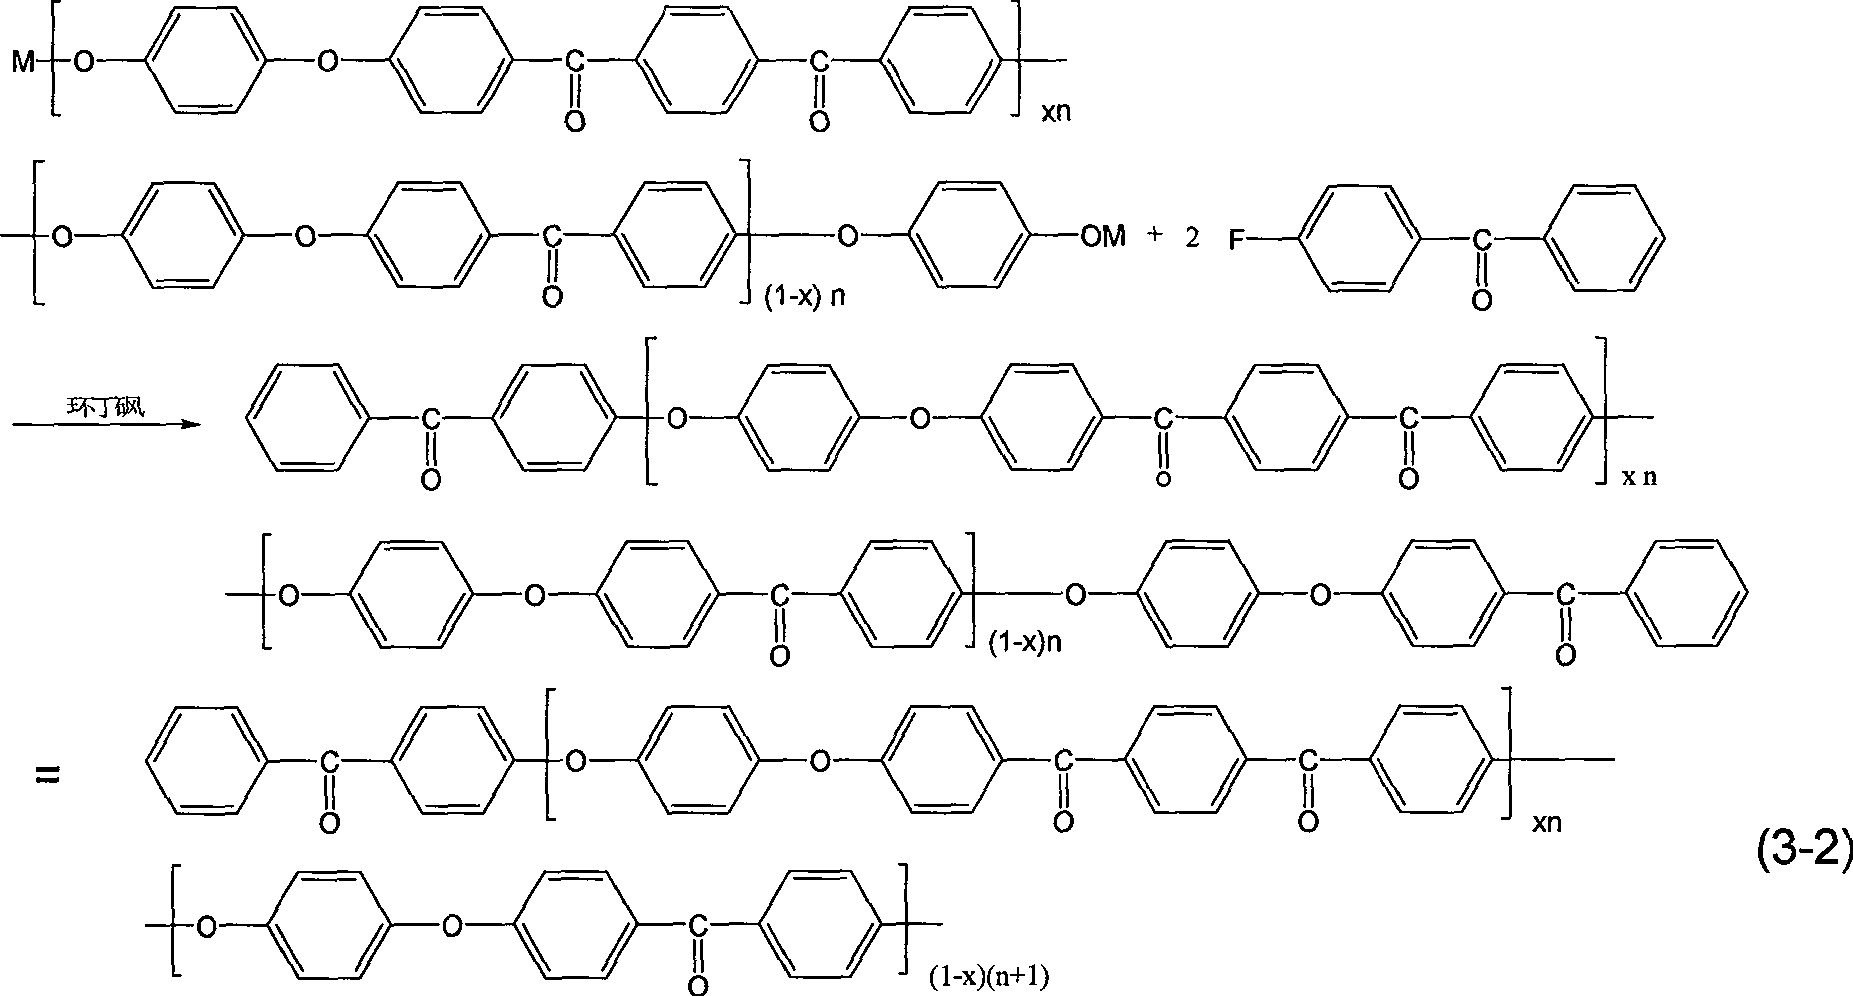 Synthesis method of ternary copolymer containing PEEK and poly(ether ether ketone ketone)s using sulfolane as solvent